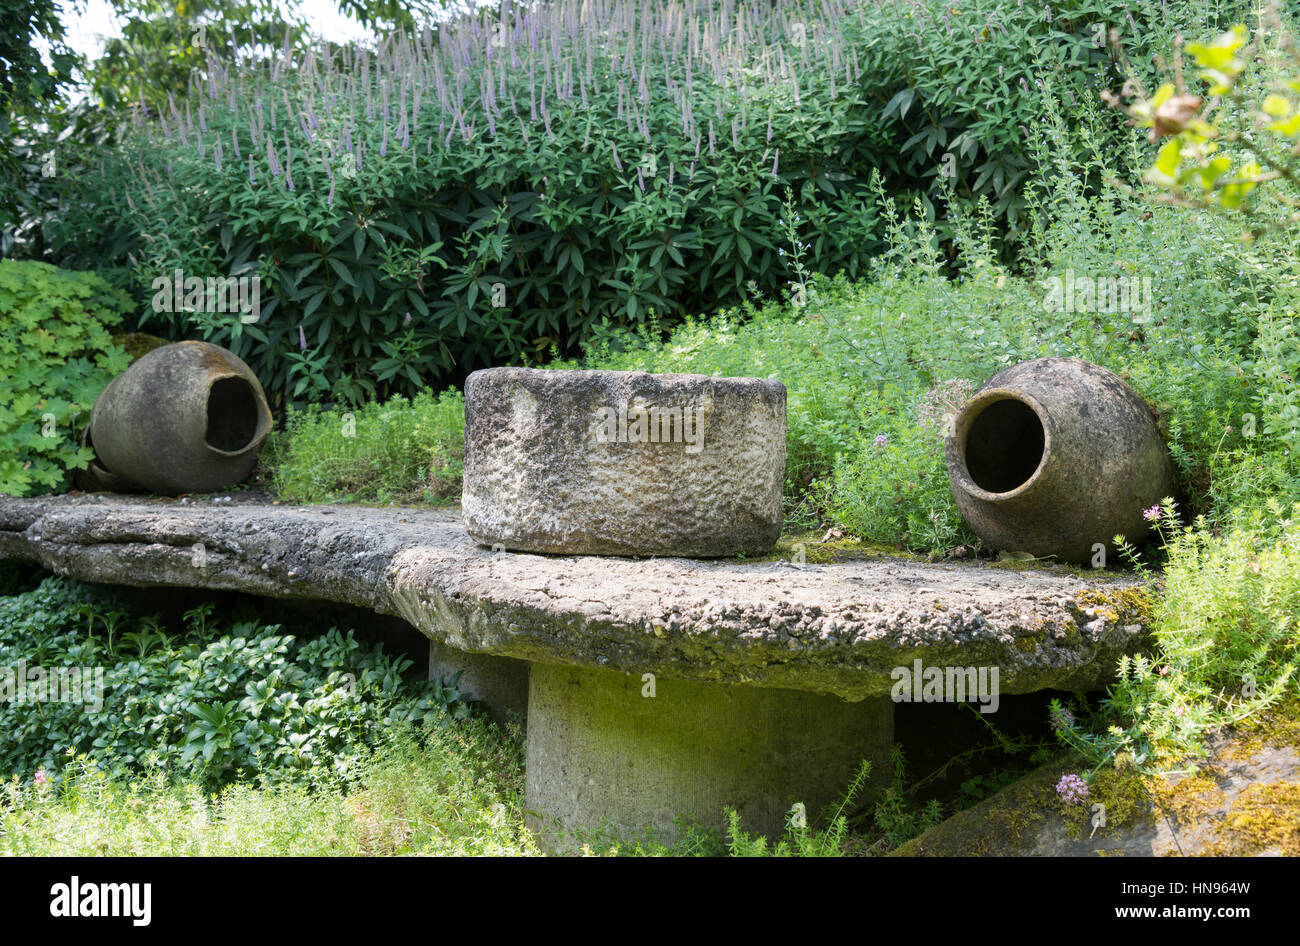 english garden with vases for plants and as decoration Stock Photo